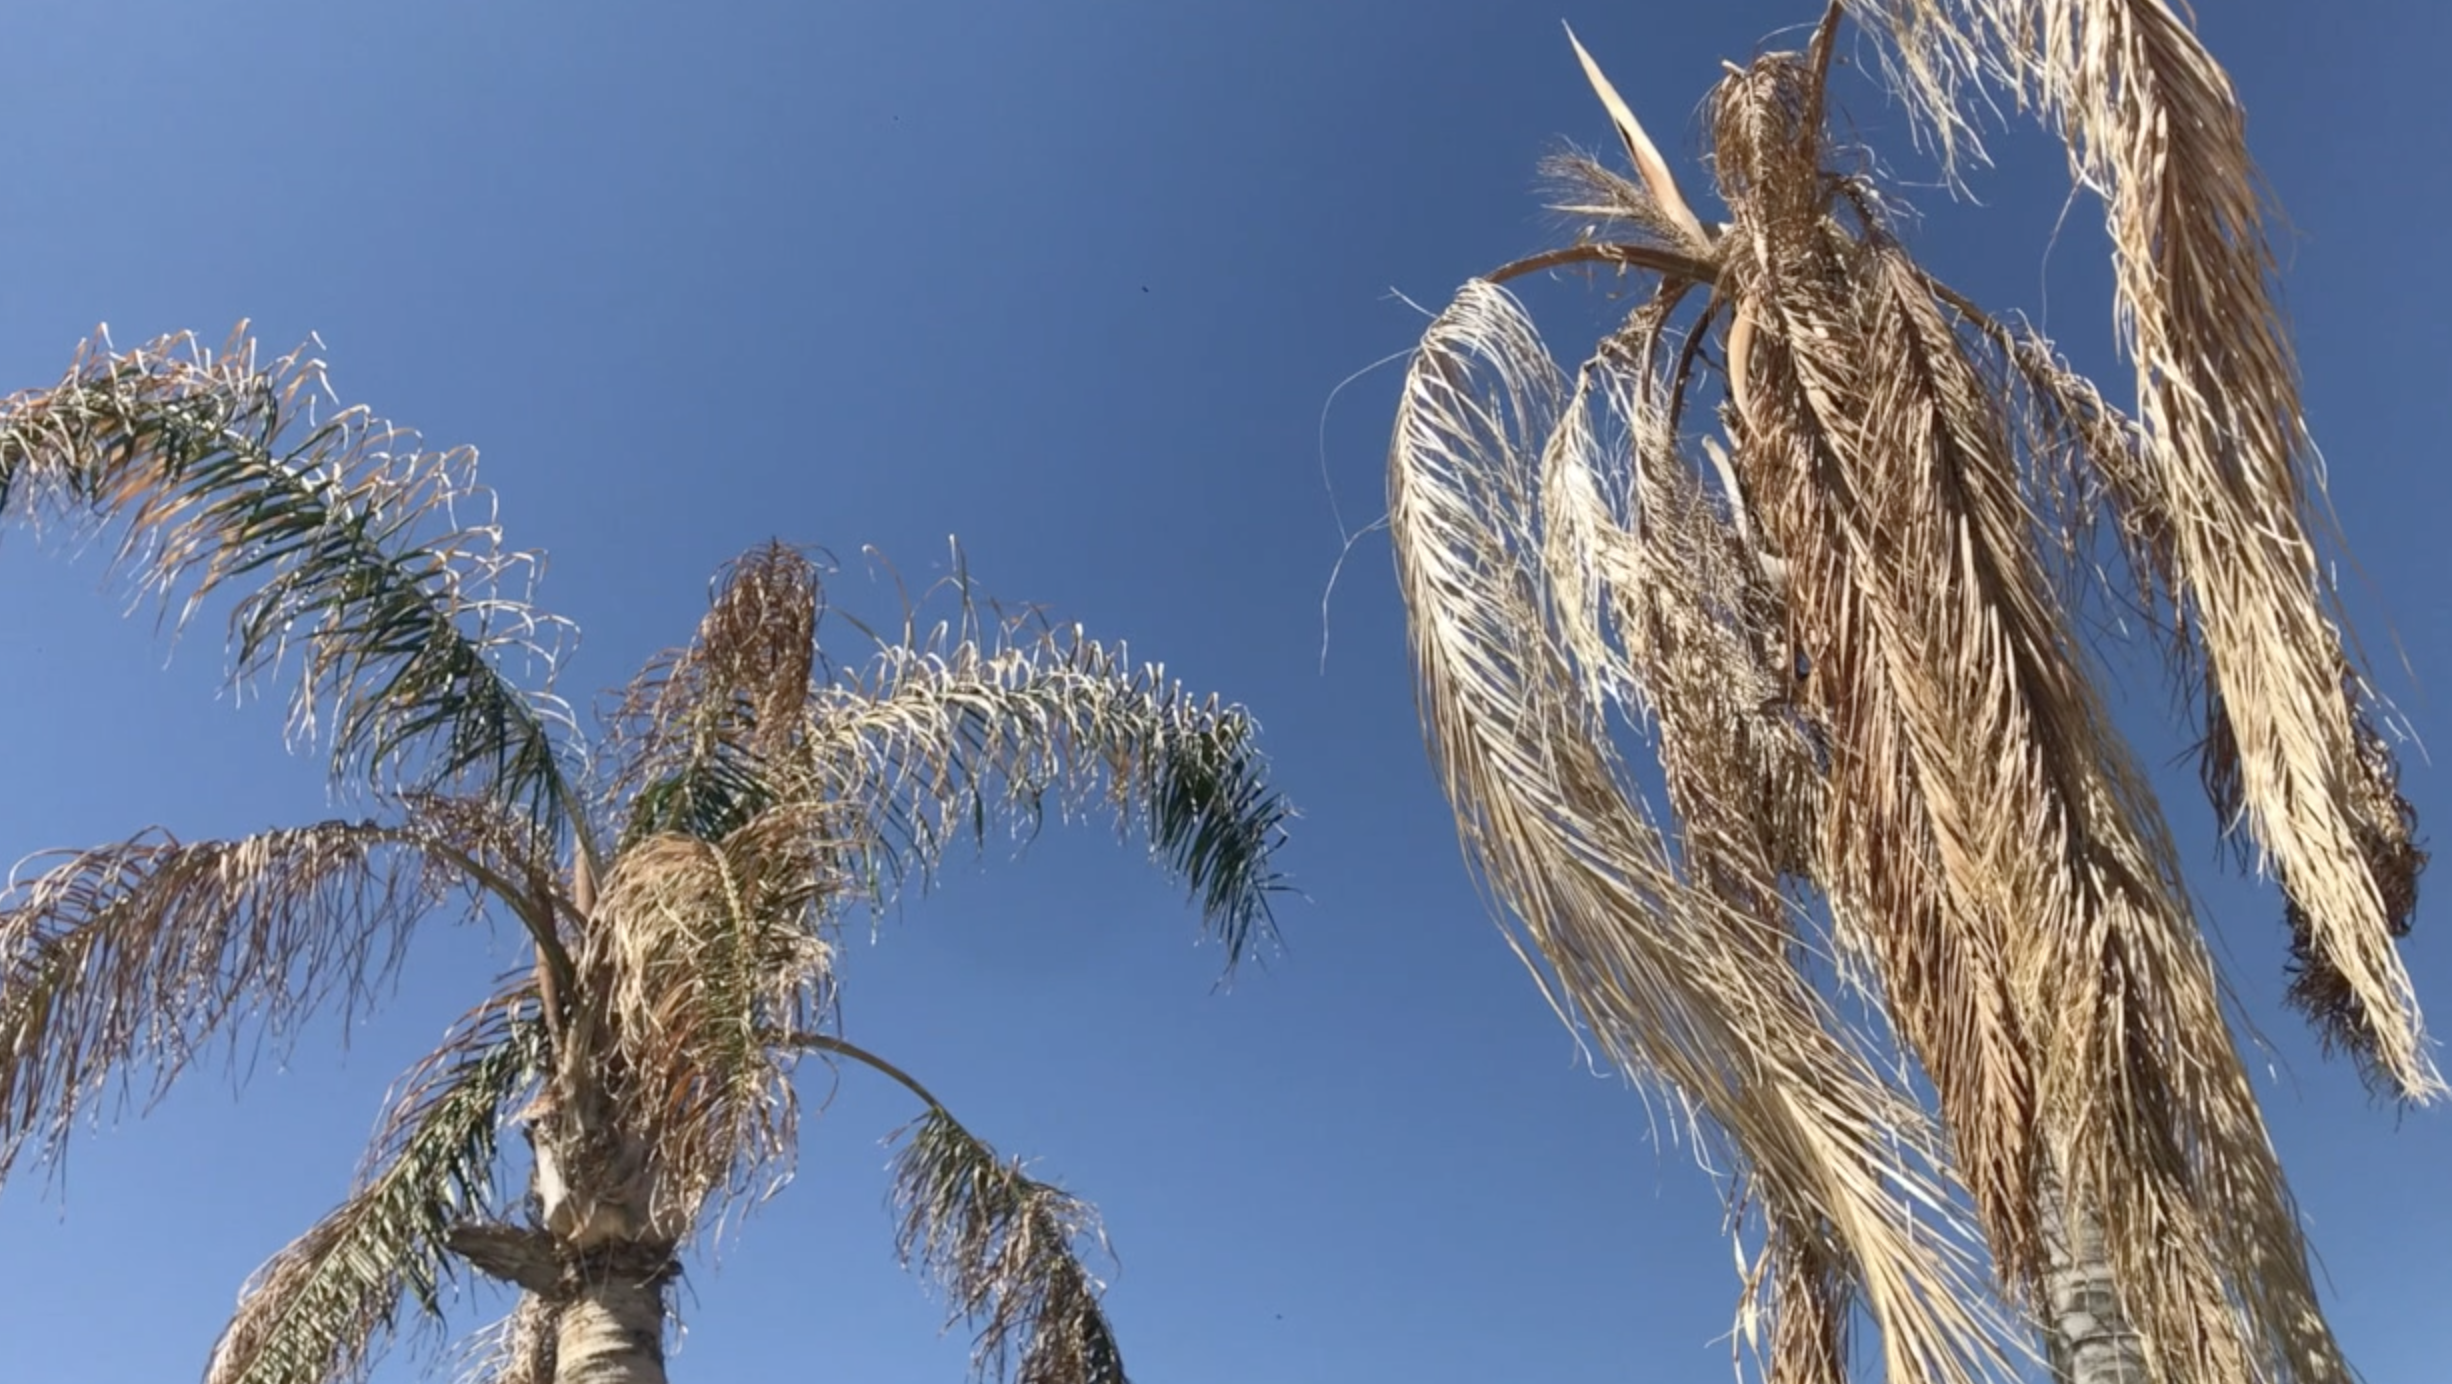 Palm before the storm: why now is the time to trim trees ahead of monsoon season